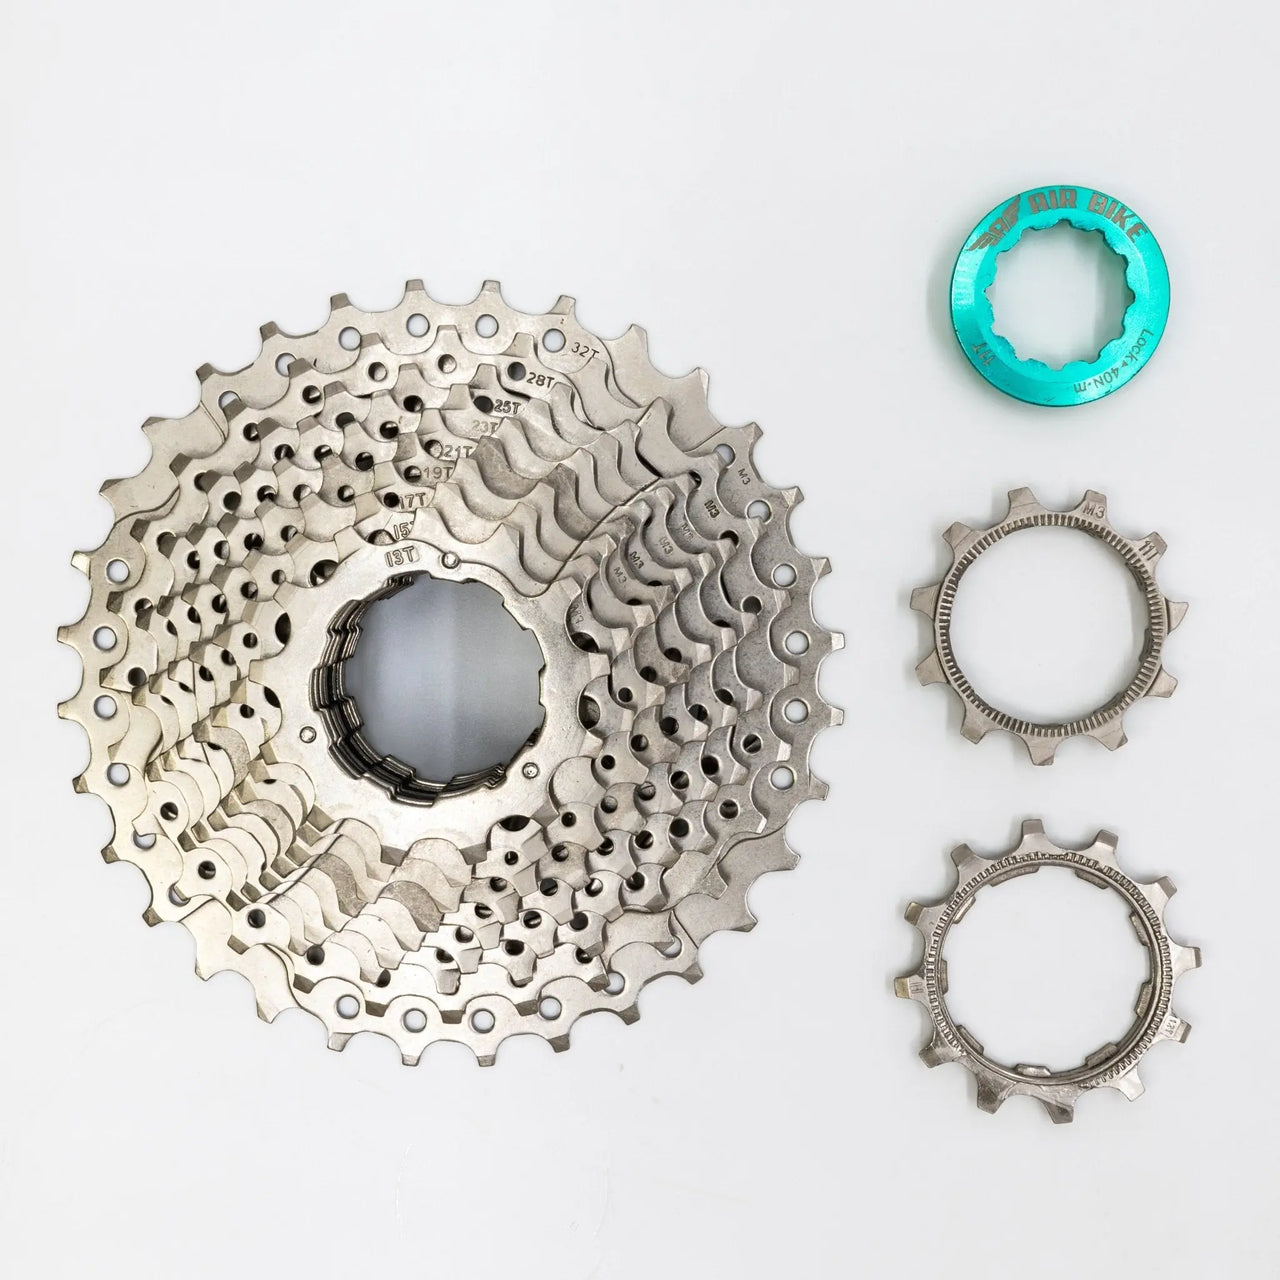 11 Speed 11-30T Cassette Road fits Shimano/Sram AirBike UK - Air BikeBicycle Cassettes & Freewheels